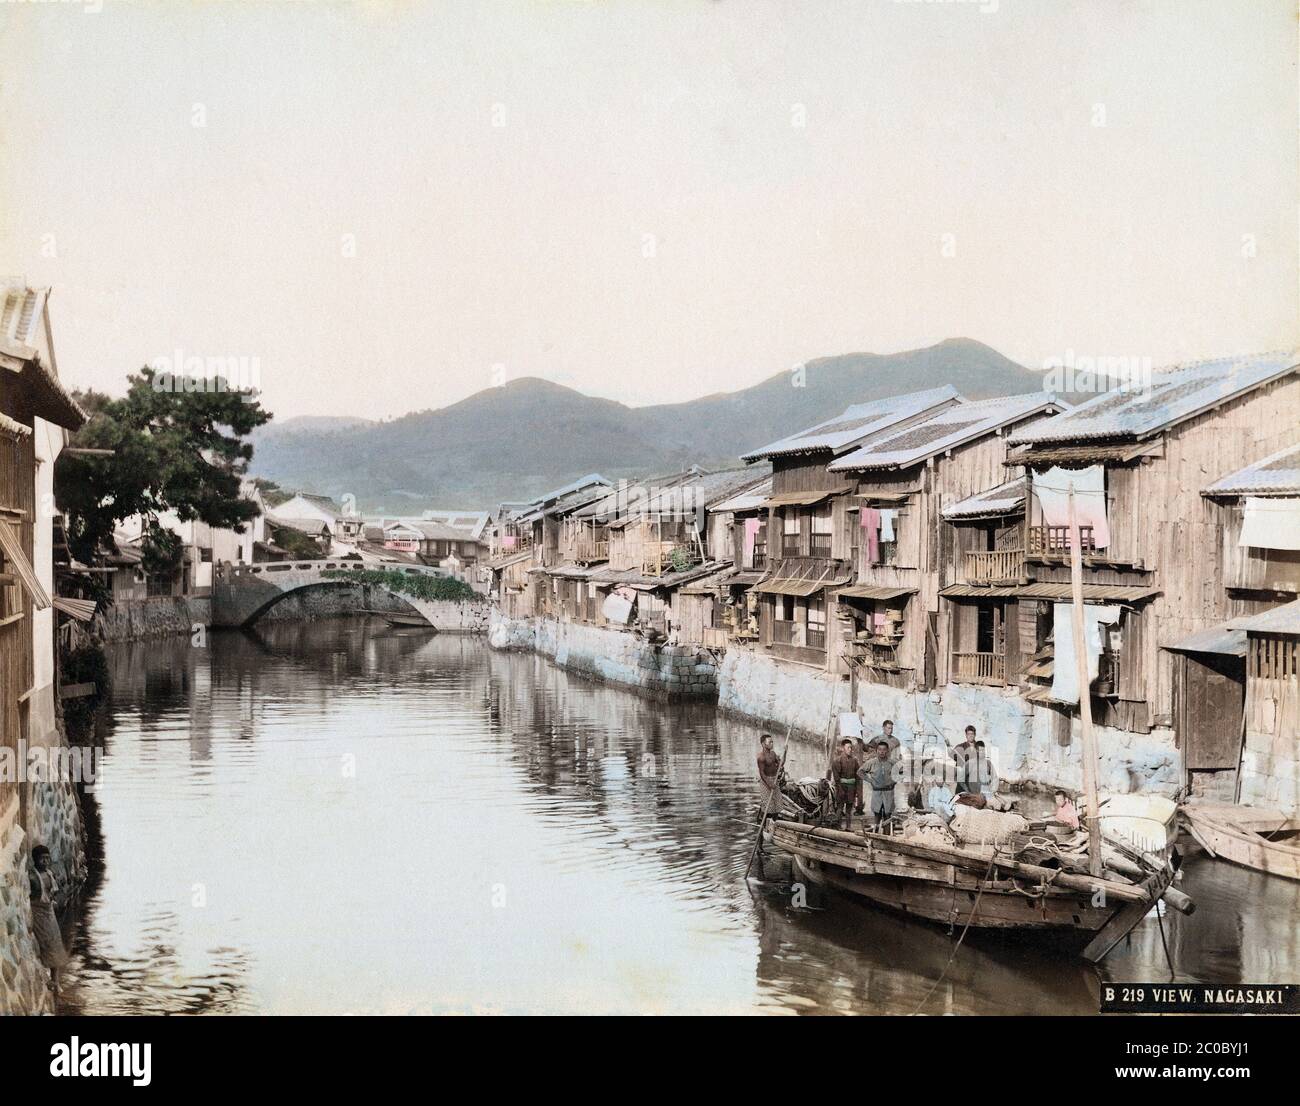 [ 1890s Japan - Boat on Nagasaki River ] — Wooden boat on the Nakashima River (中島川) in Nagasaki.   In the back, the Yorozubashi Bridge (万橋) is visible. Originally built in 1678 (Enpo 6), it was replaced in 1801 (Kansei 13). In 1915 (Taisho 4), the stone bridge on this image was replaced with a concrete bridge with iron girders.  The area on the right is now the streetcar line between Nigiwaibashi Bridge (賑橋) and Nishihamano-machi (西浜町).  19th century vintage albumen photograph. Stock Photo